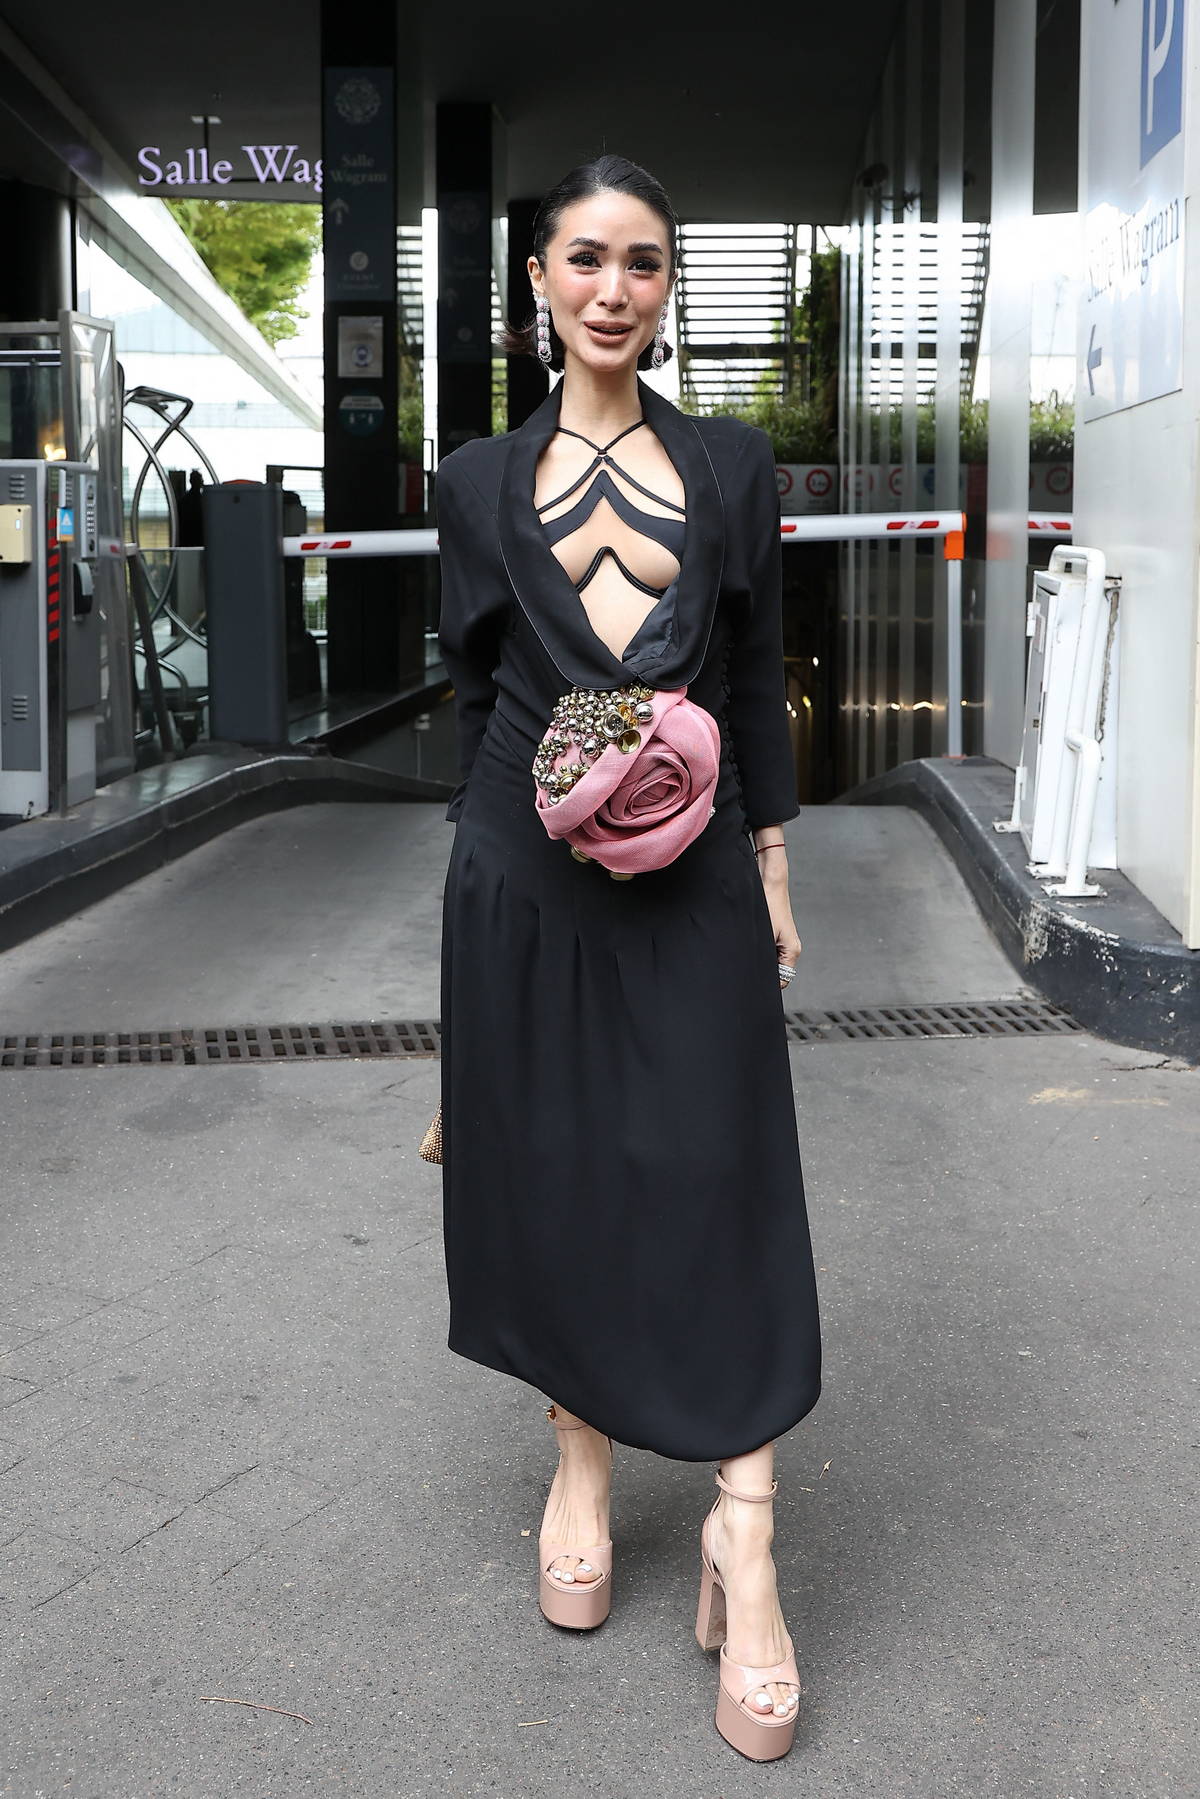 Heart Evangelista attends the Elie Saab Haute Couture Fall-Winter 2023-24  show during Paris Fashion